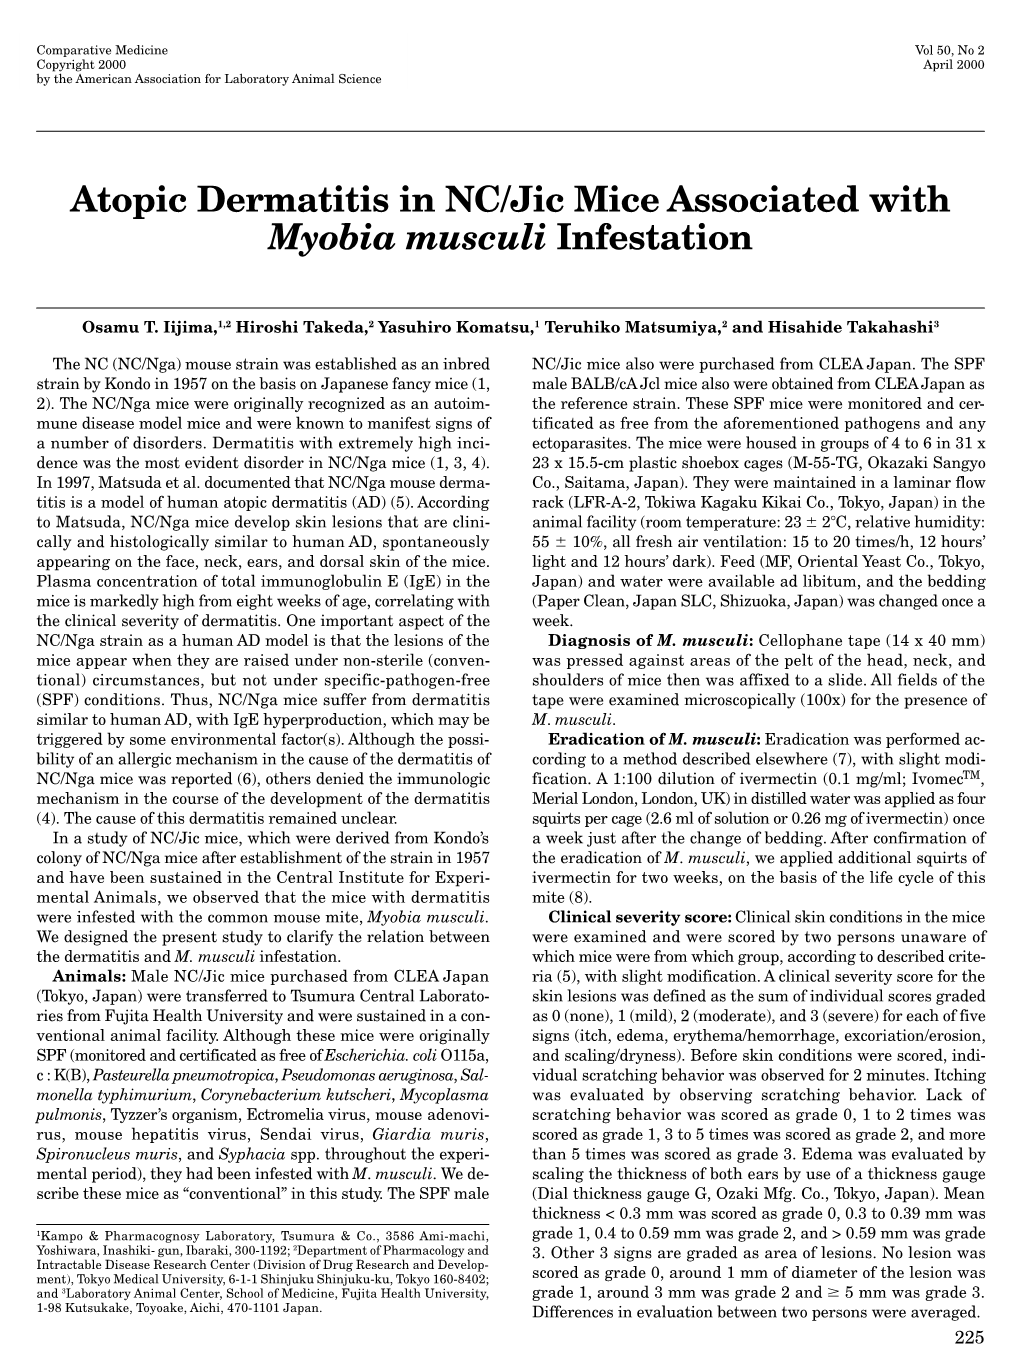 Atopic Dermatitis in NC/Jic Mice Associated With&lt;I